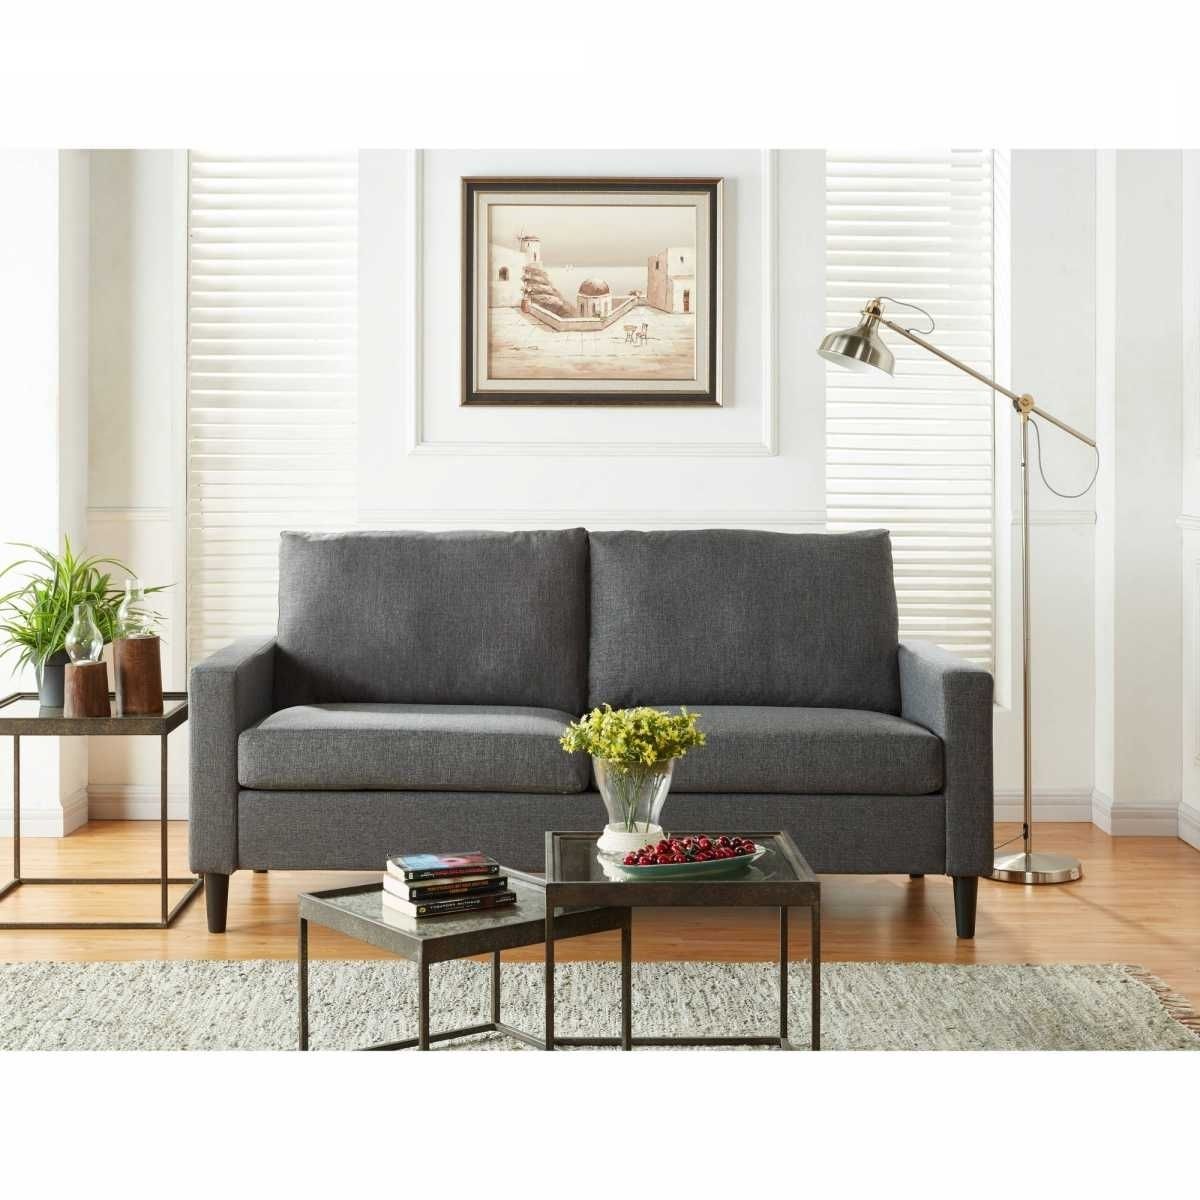 Loveseat : Furniture: Sectional Couch For Sale | Big Lots Roanoke Va Within Roanoke Va Sectional Sofas (Photo 8 of 10)